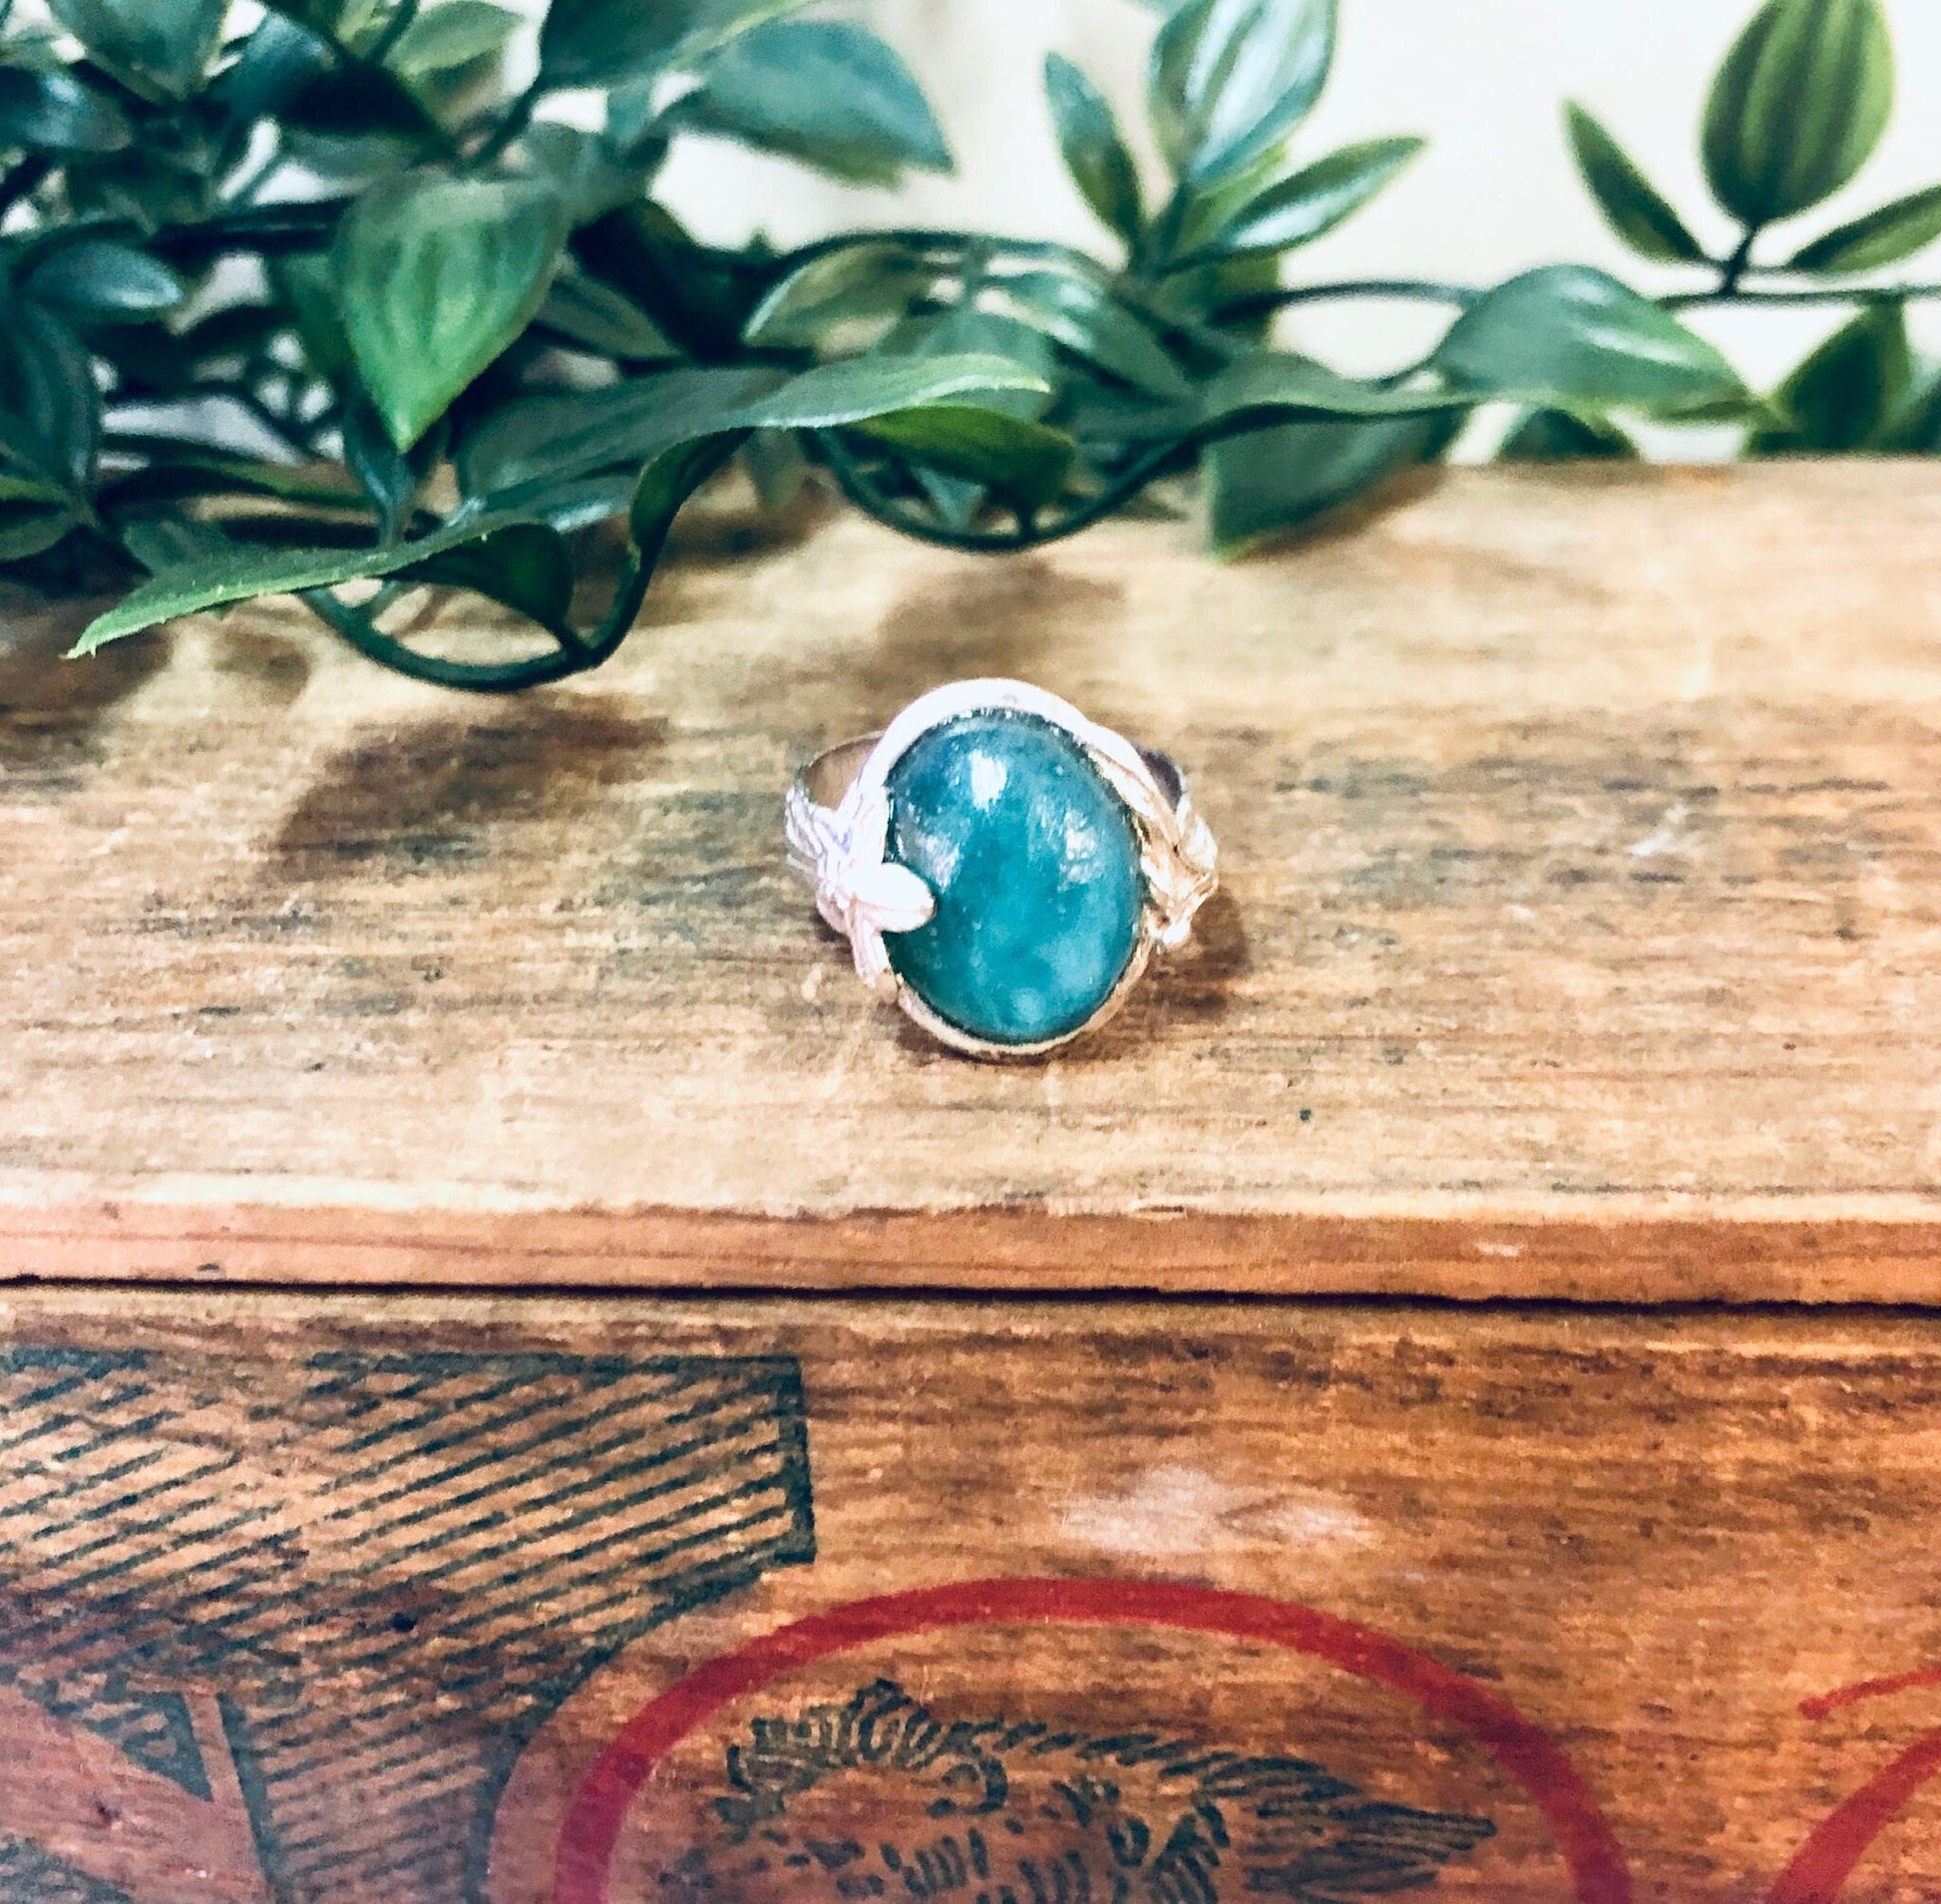 Vintage silver ring with oval green turquoise stone surrounded by floral design on weathered wooden surface with plant leaves in background